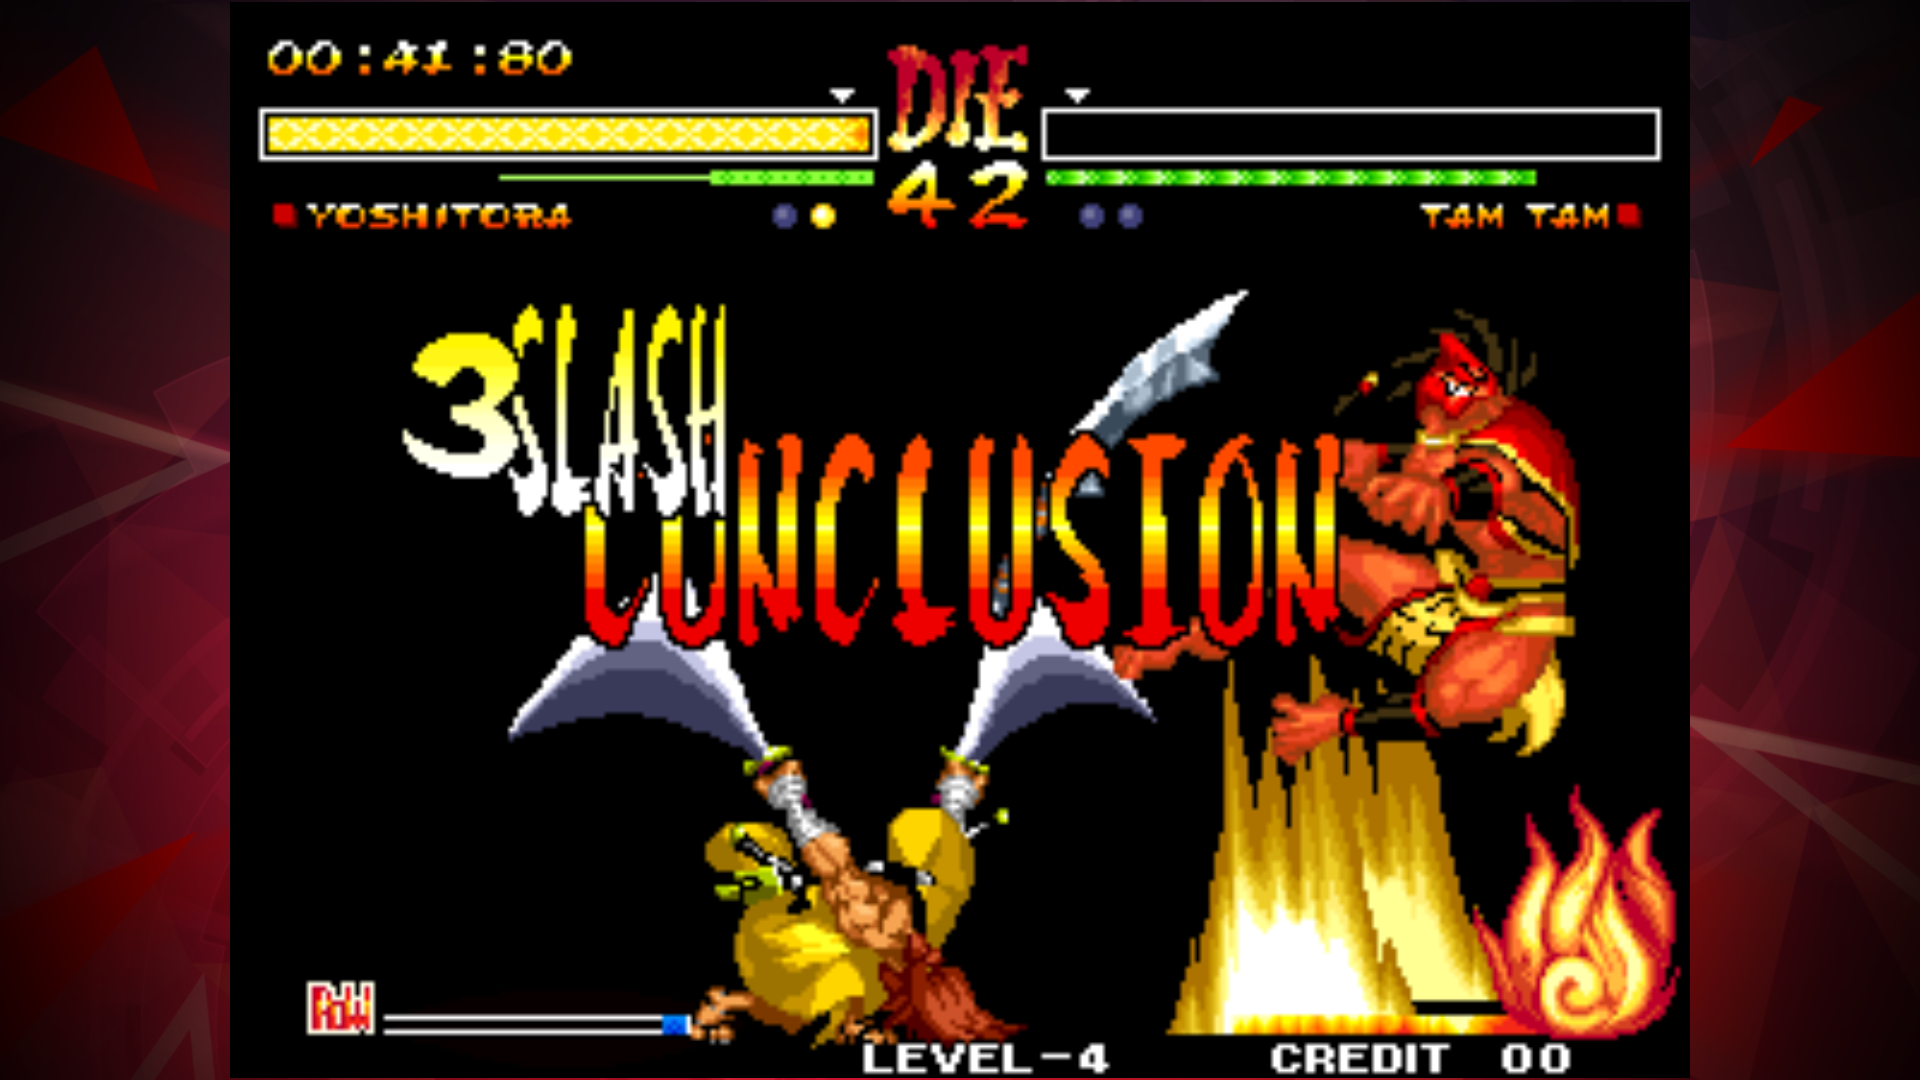 Classic Fighter 'Samurai Shodown V ACA NeoGeo' From SNK and Hamster Is Out Now on iOS and Android